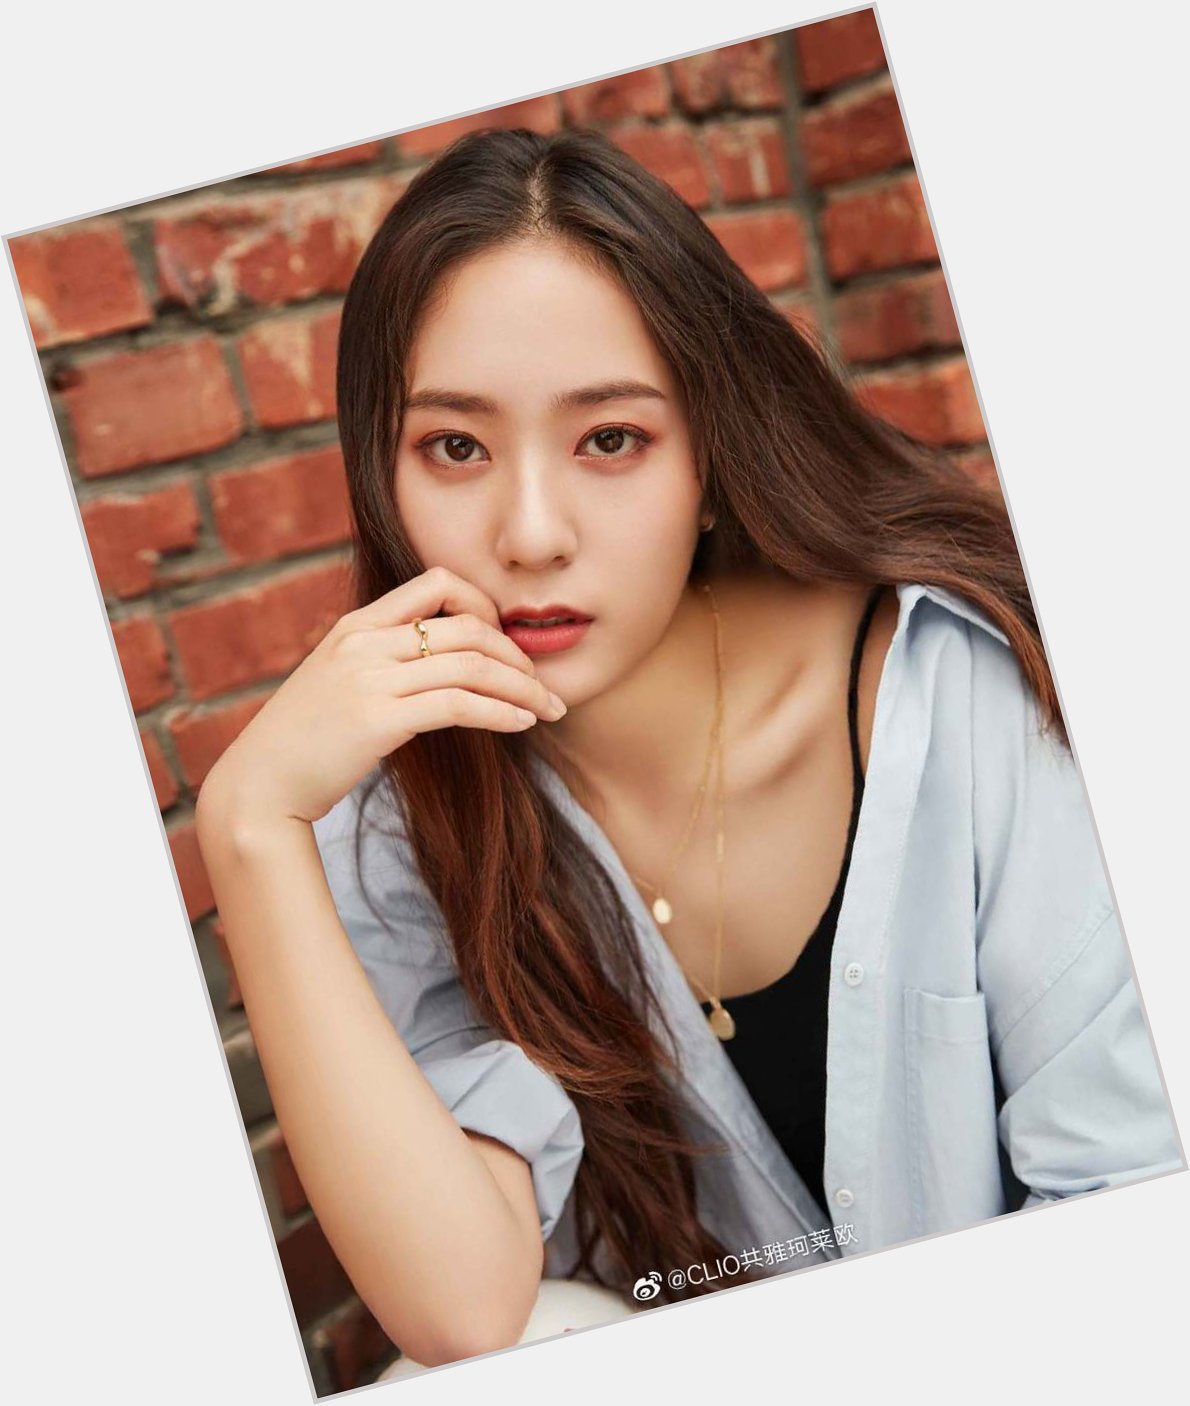 To the queen of all visuals, happy birthday krystal jung!  